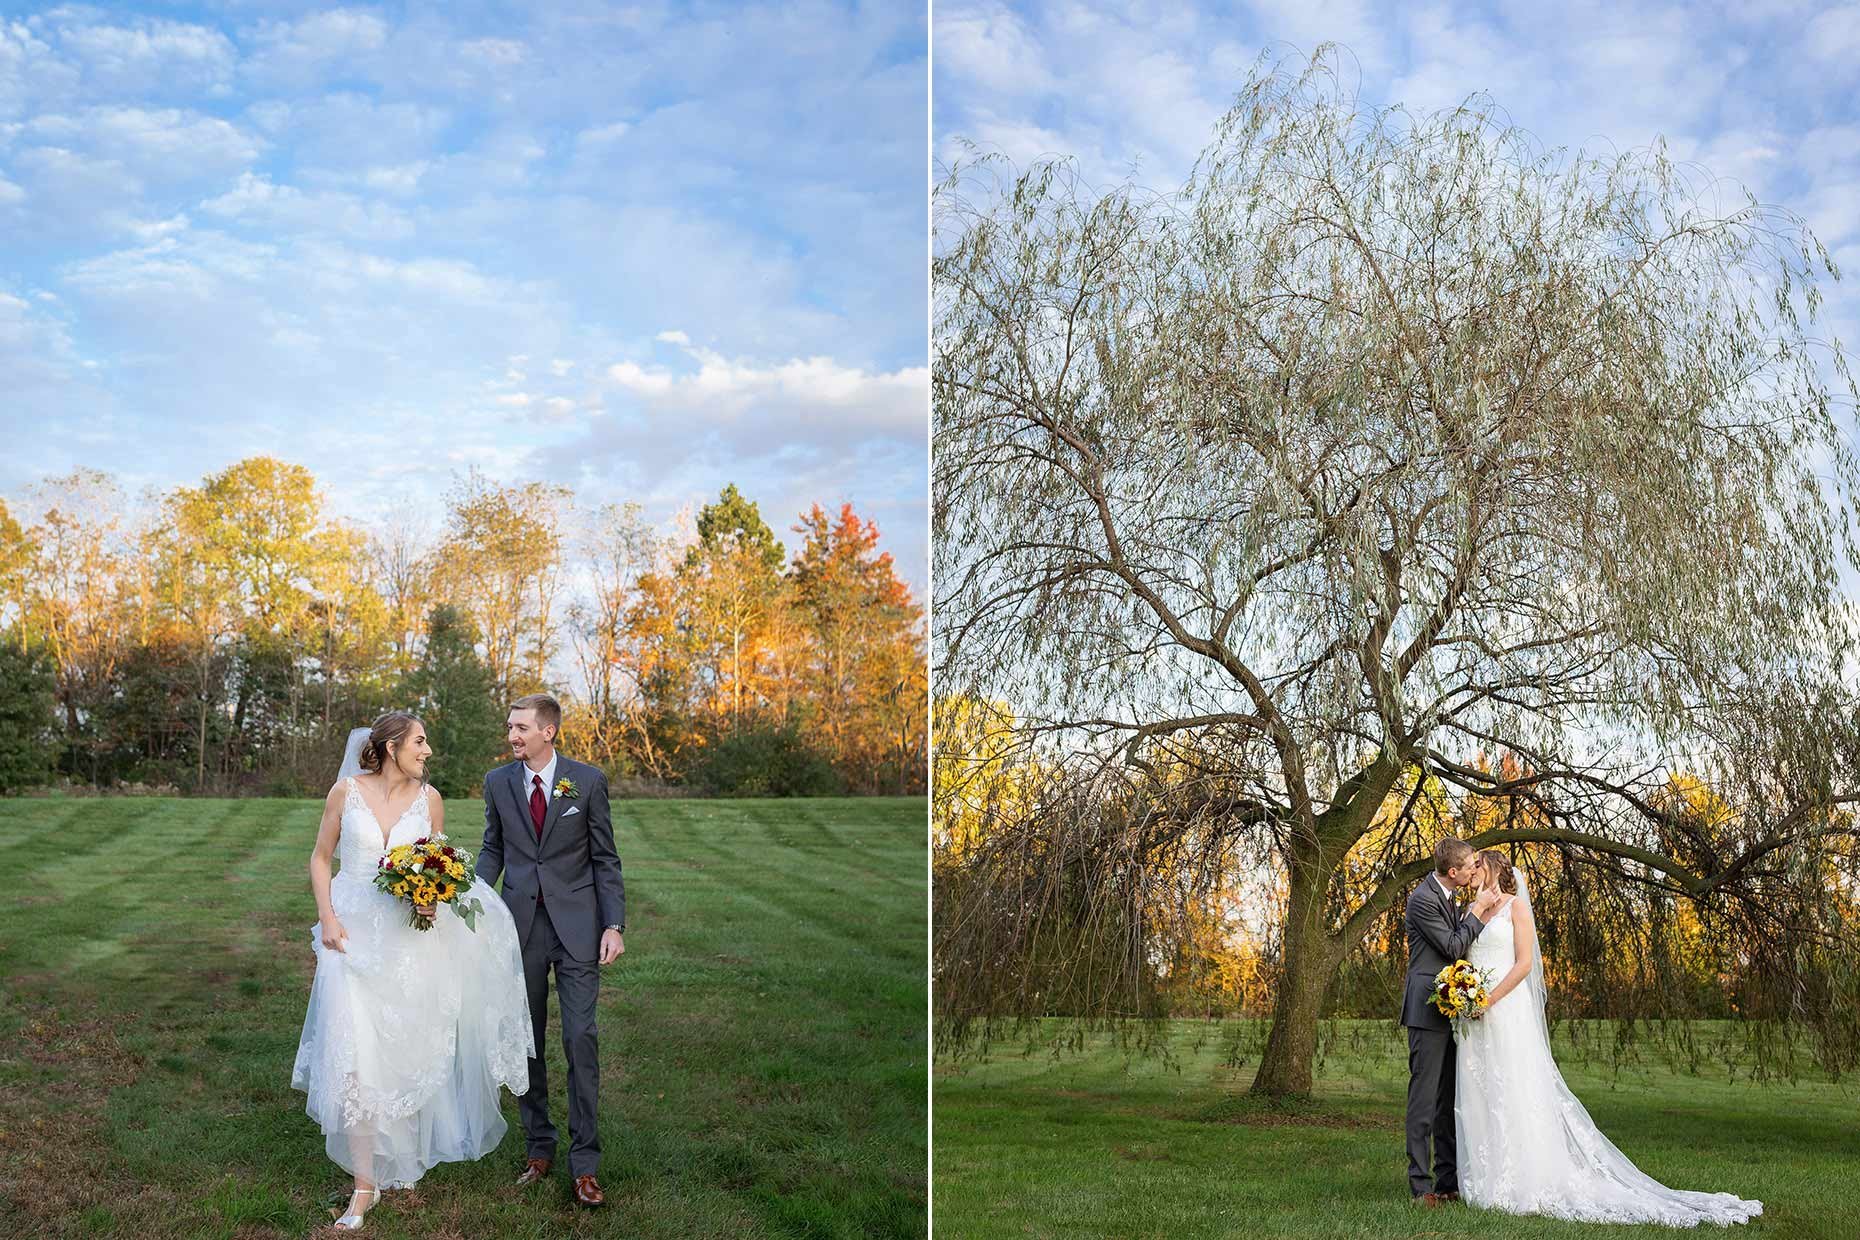 Bride &amp; Groom walking in a field &amp; kissing under a willow tree